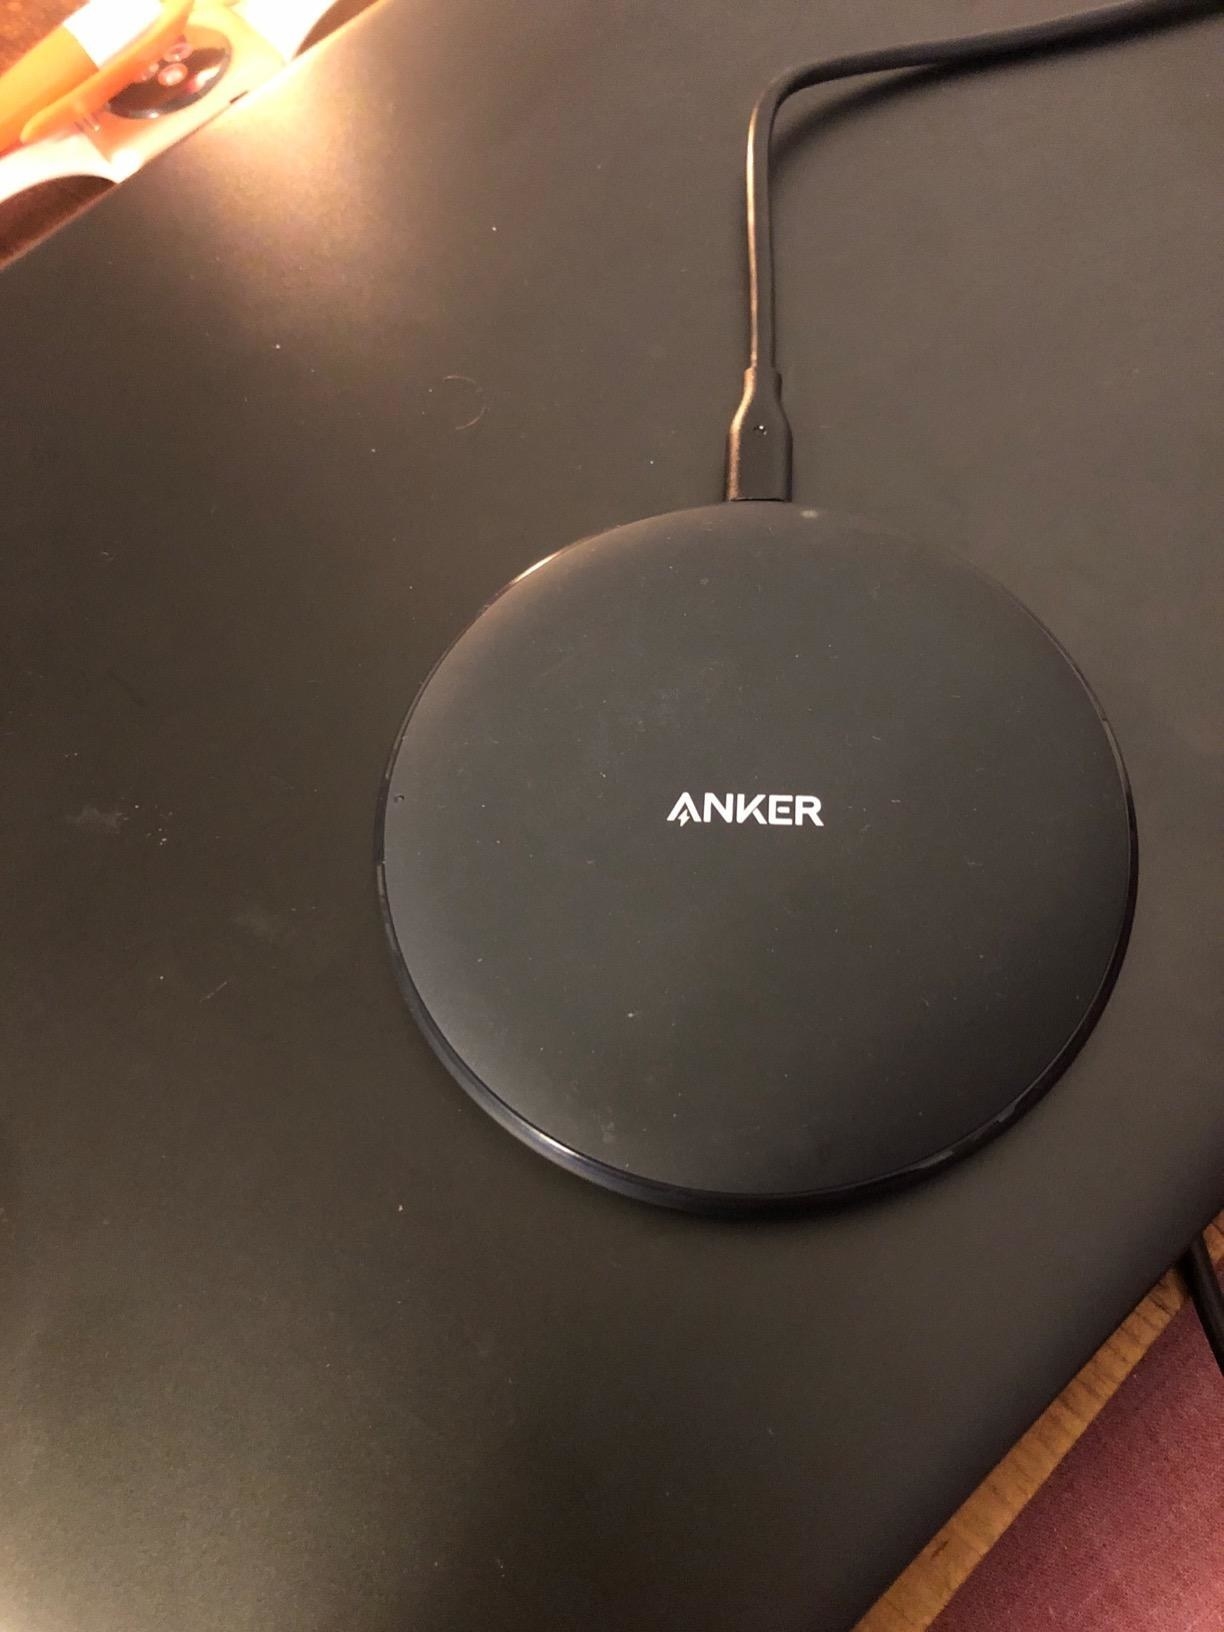 A round black Anker wireless charger sitting on a black tabletop